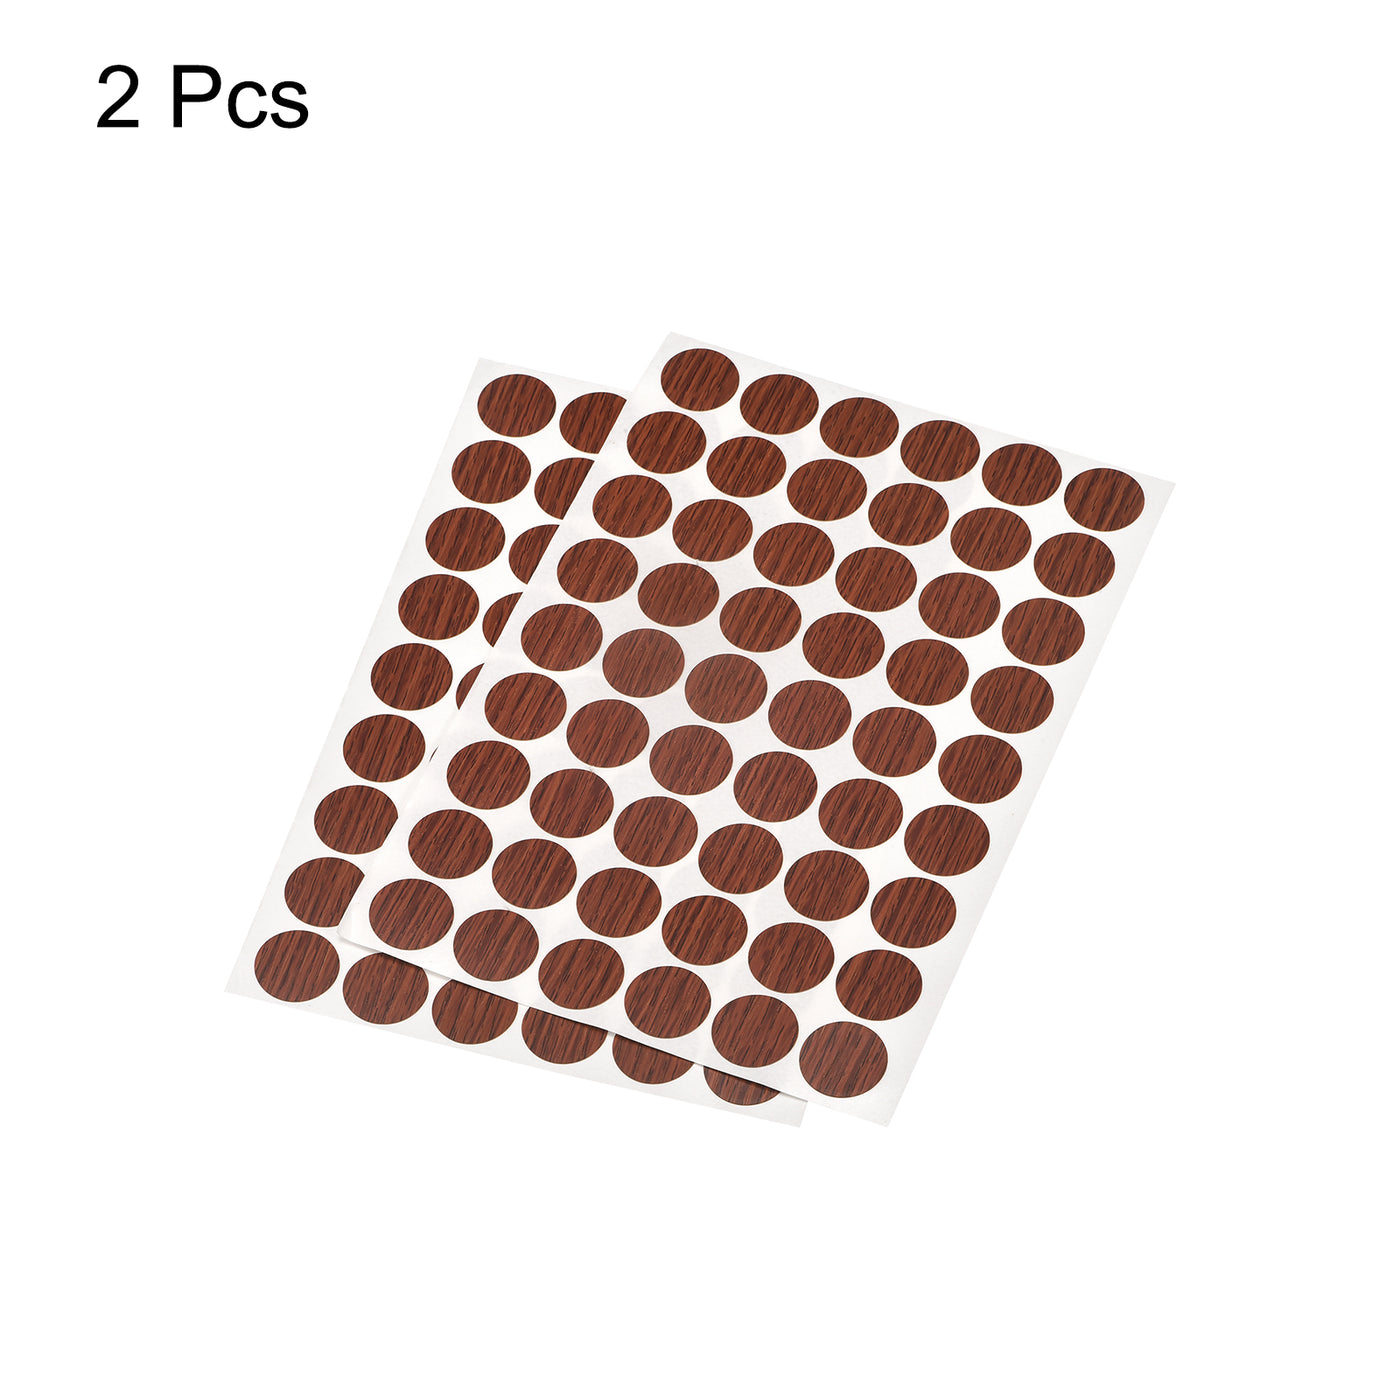 uxcell Uxcell Screw Hole Cover Stickers, 21mm Dia PVC Self Adhesive Covers Caps for Wood Furniture Cabinet Shelf Wardrobe, Walnut 2 Sheet/108pcs